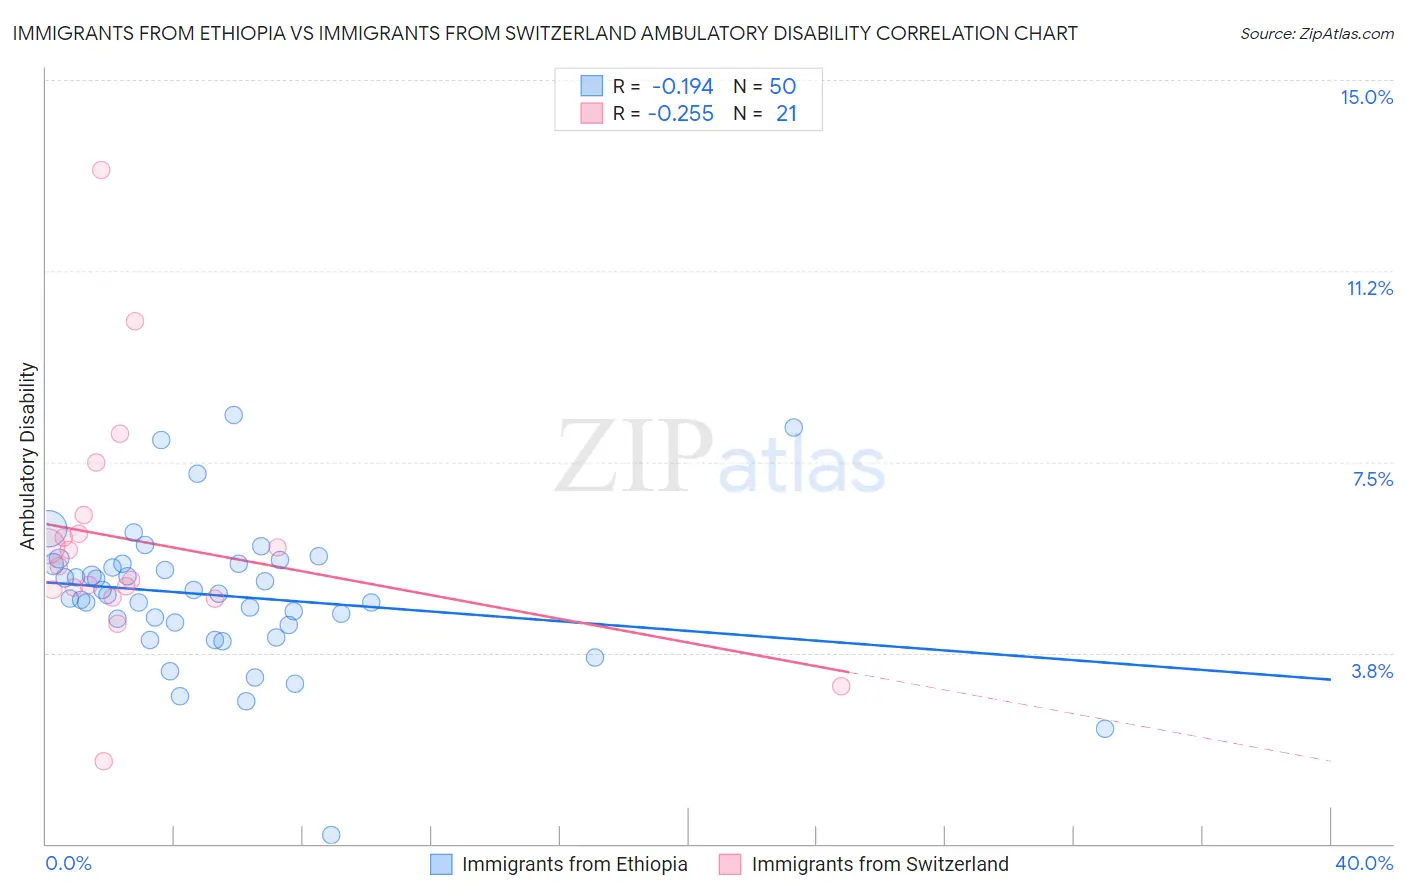 Immigrants from Ethiopia vs Immigrants from Switzerland Ambulatory Disability